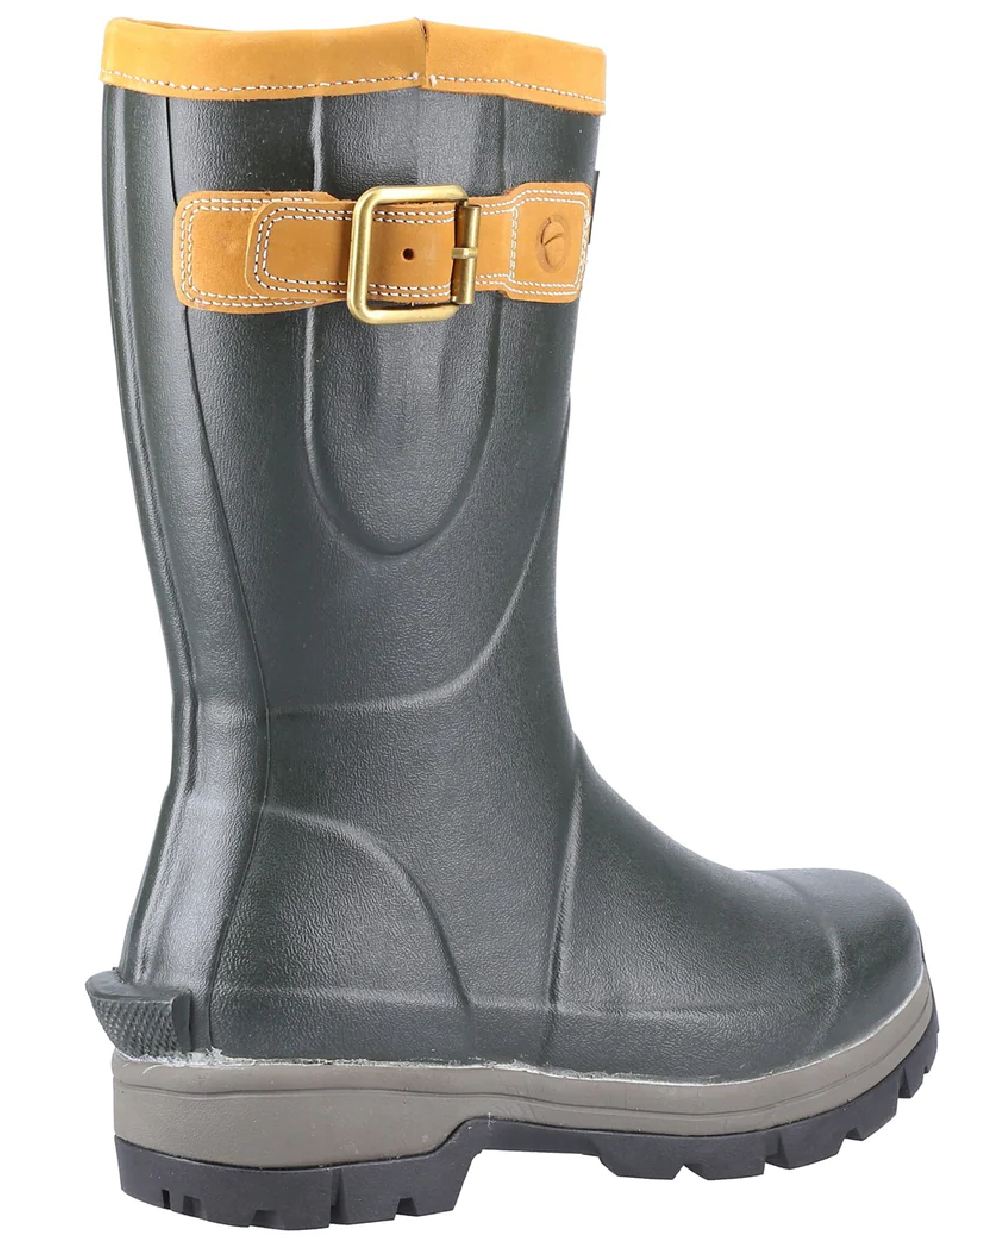 Cotswold Stratus Wellington Short Boots in Green 